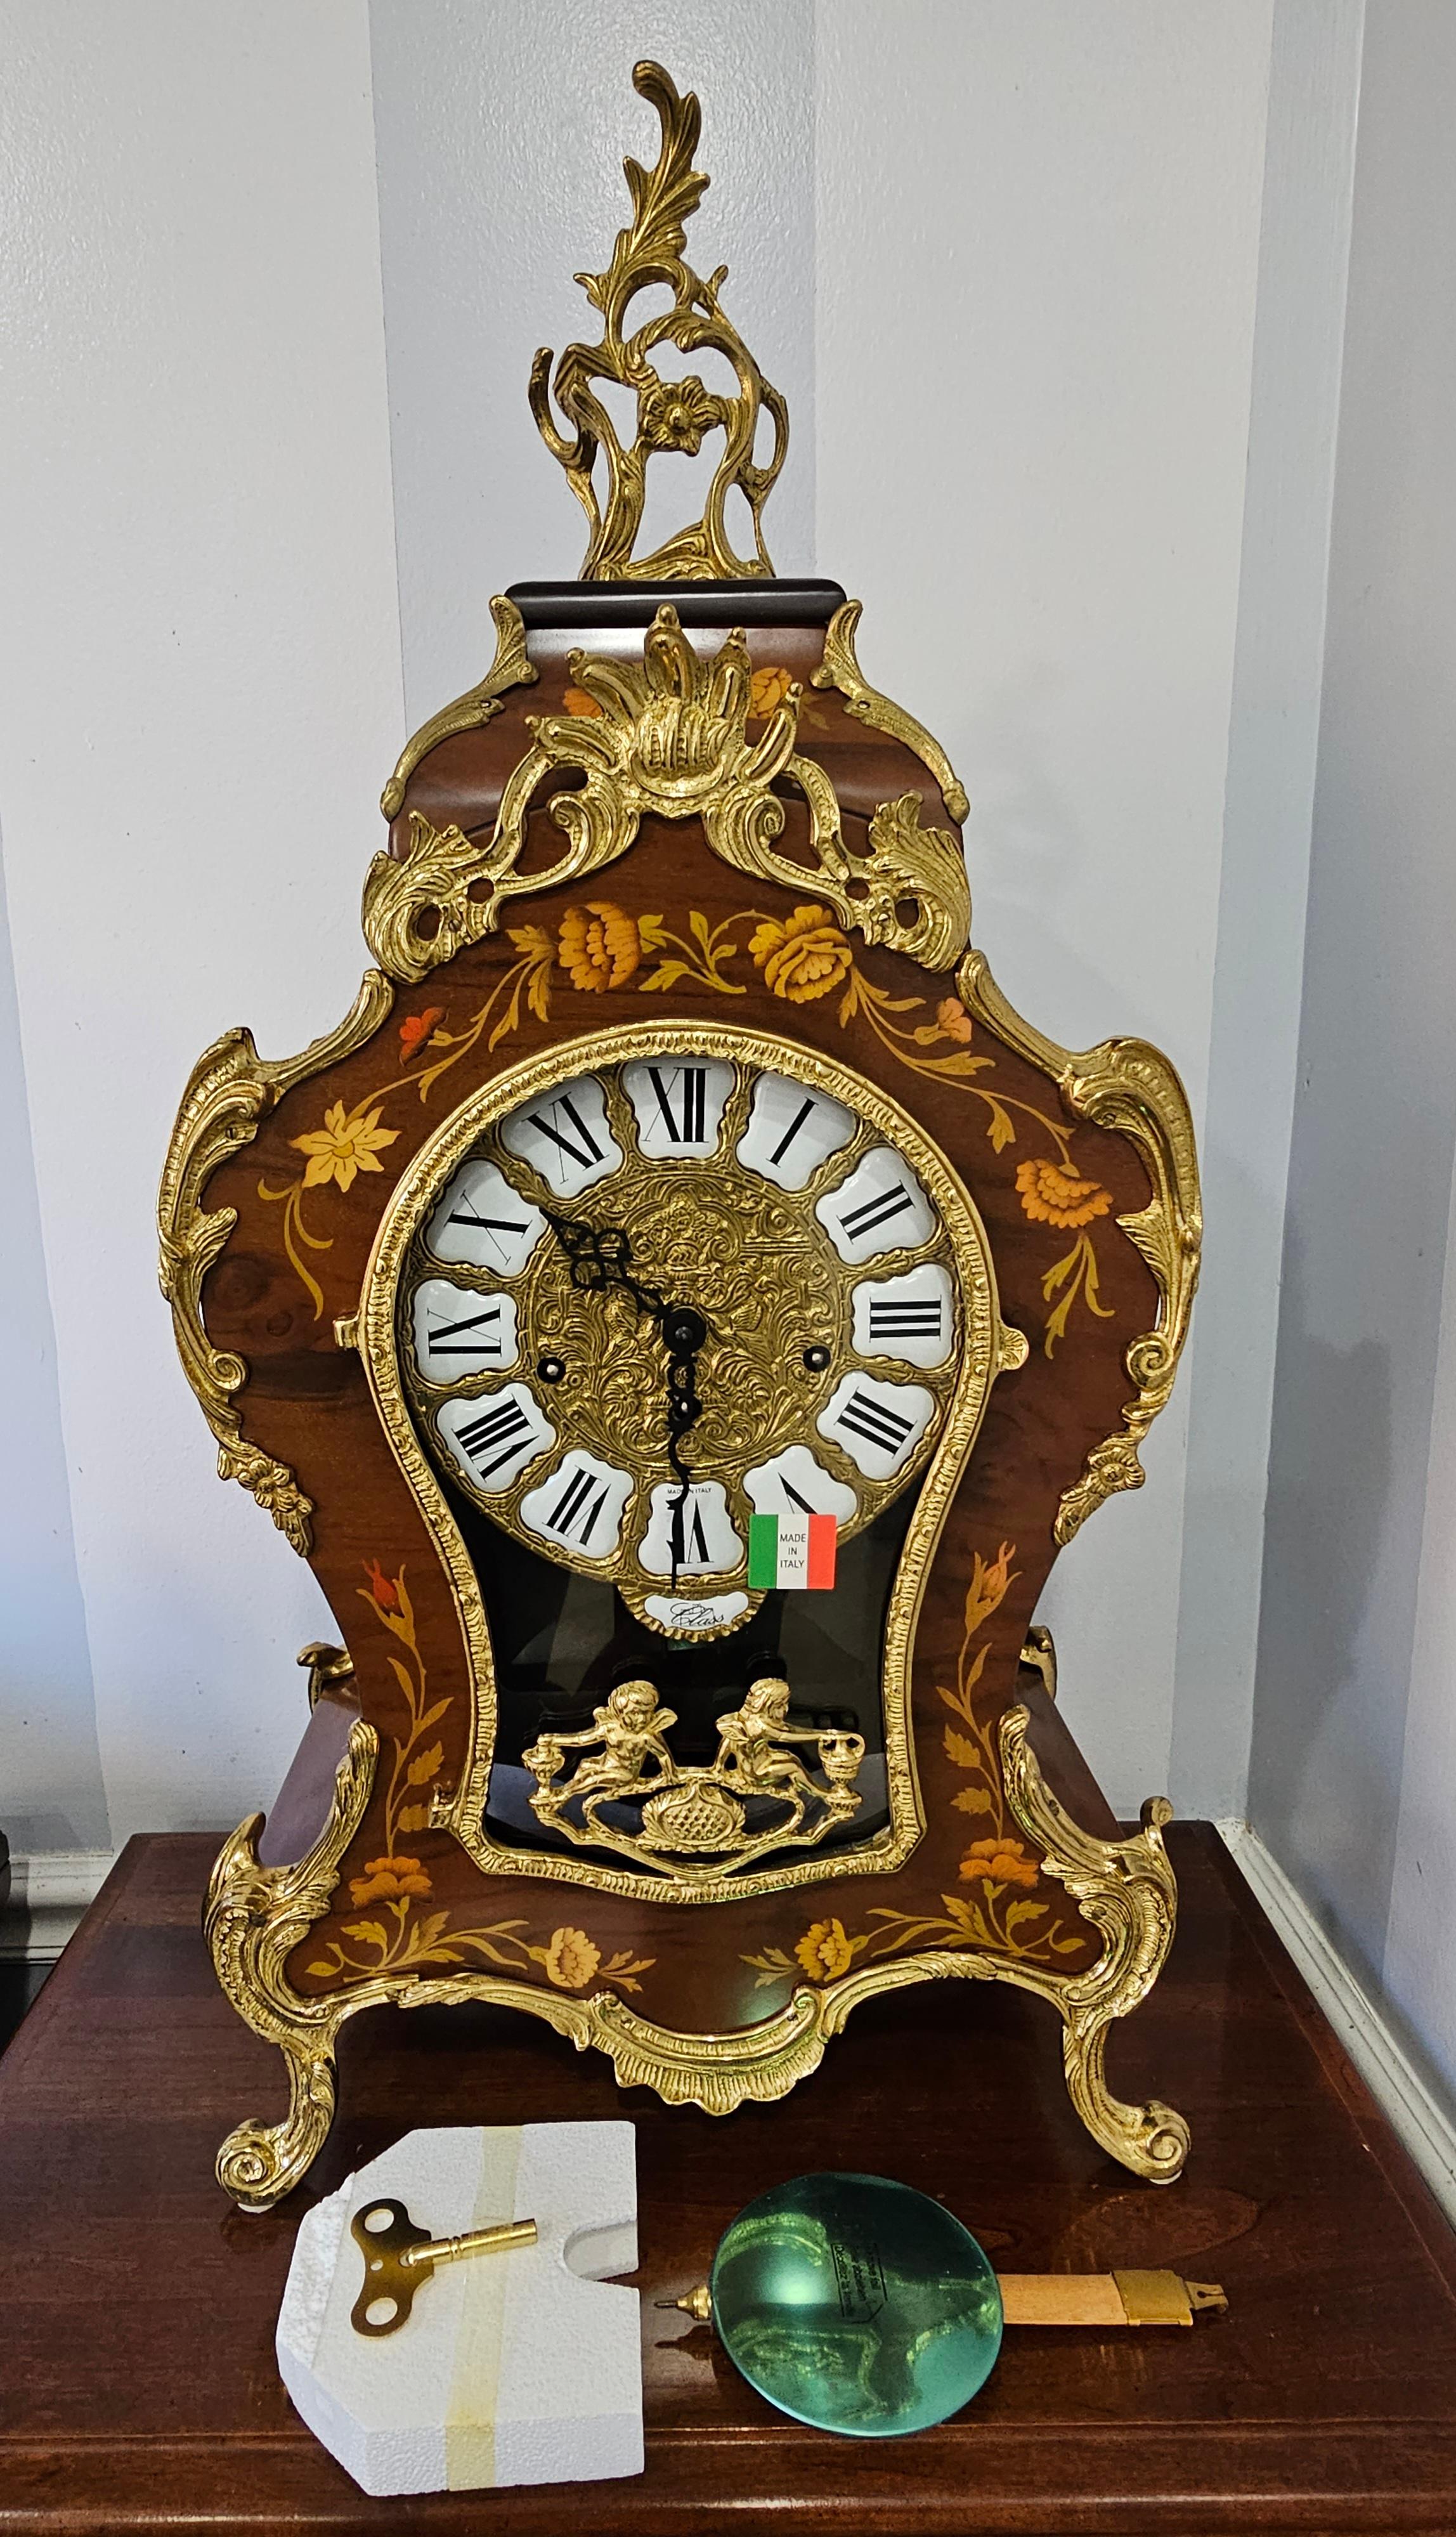 New Franz Hermle Mantel Clock in DeArt Italian Fine Marquetry and Ormolu Case, N For Sale 3